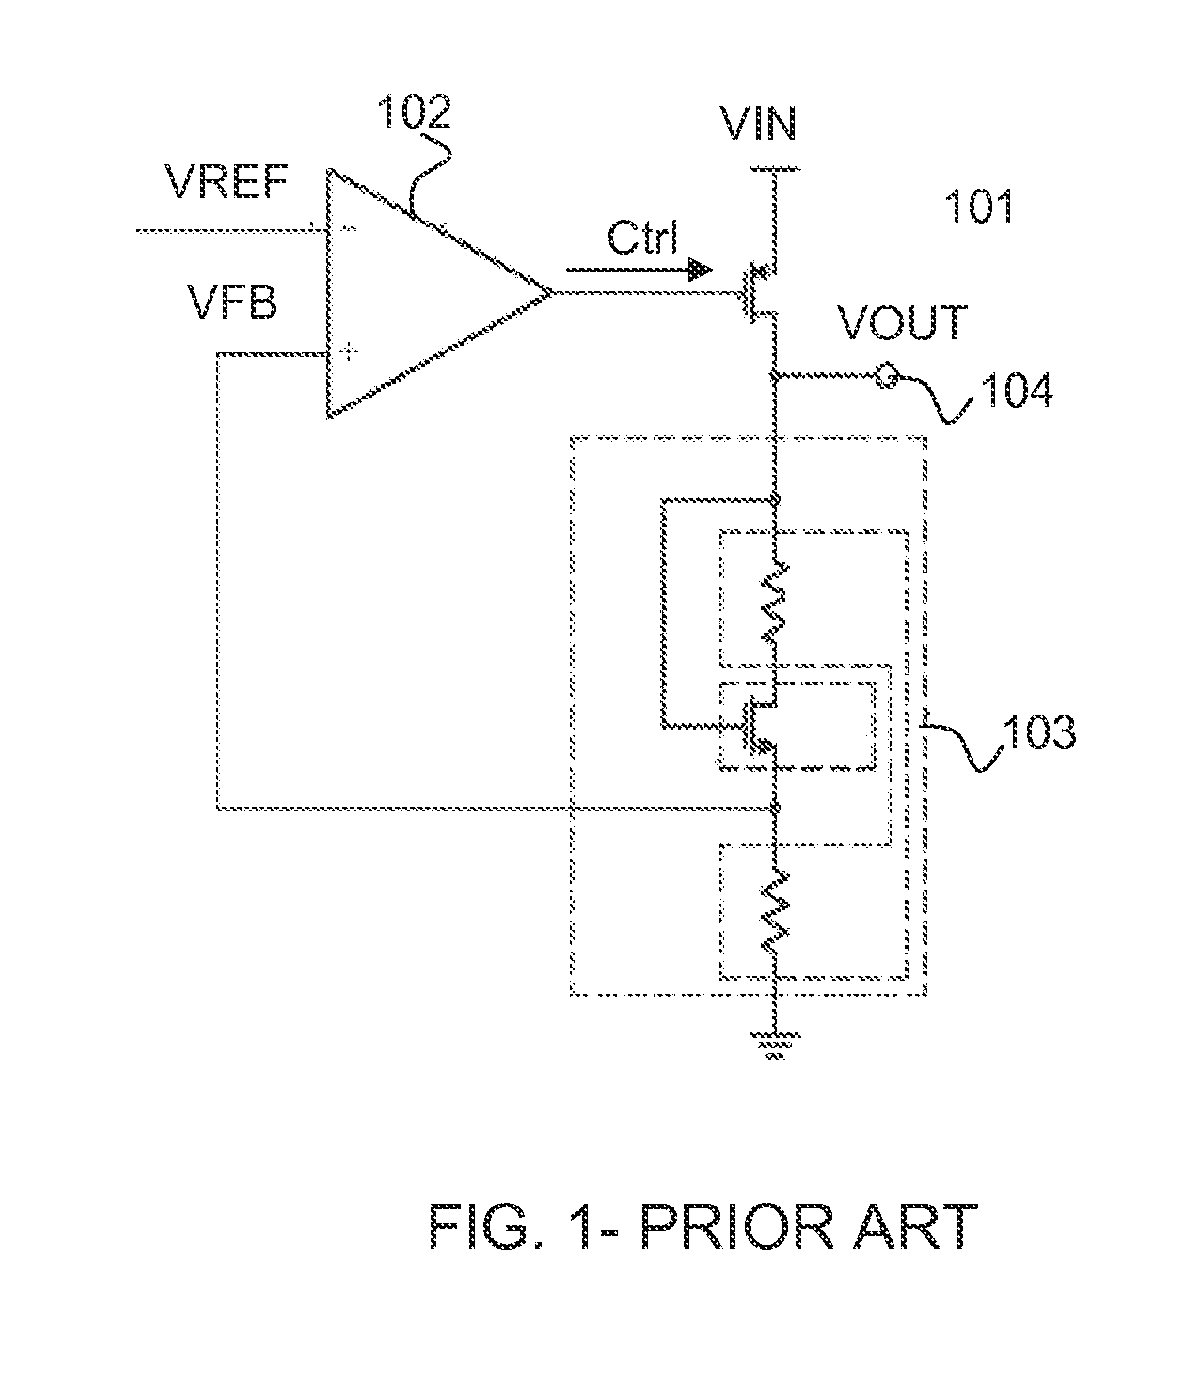 Voltage regulator, application-specific integrated circuit and method for providing a load with a regulated voltage